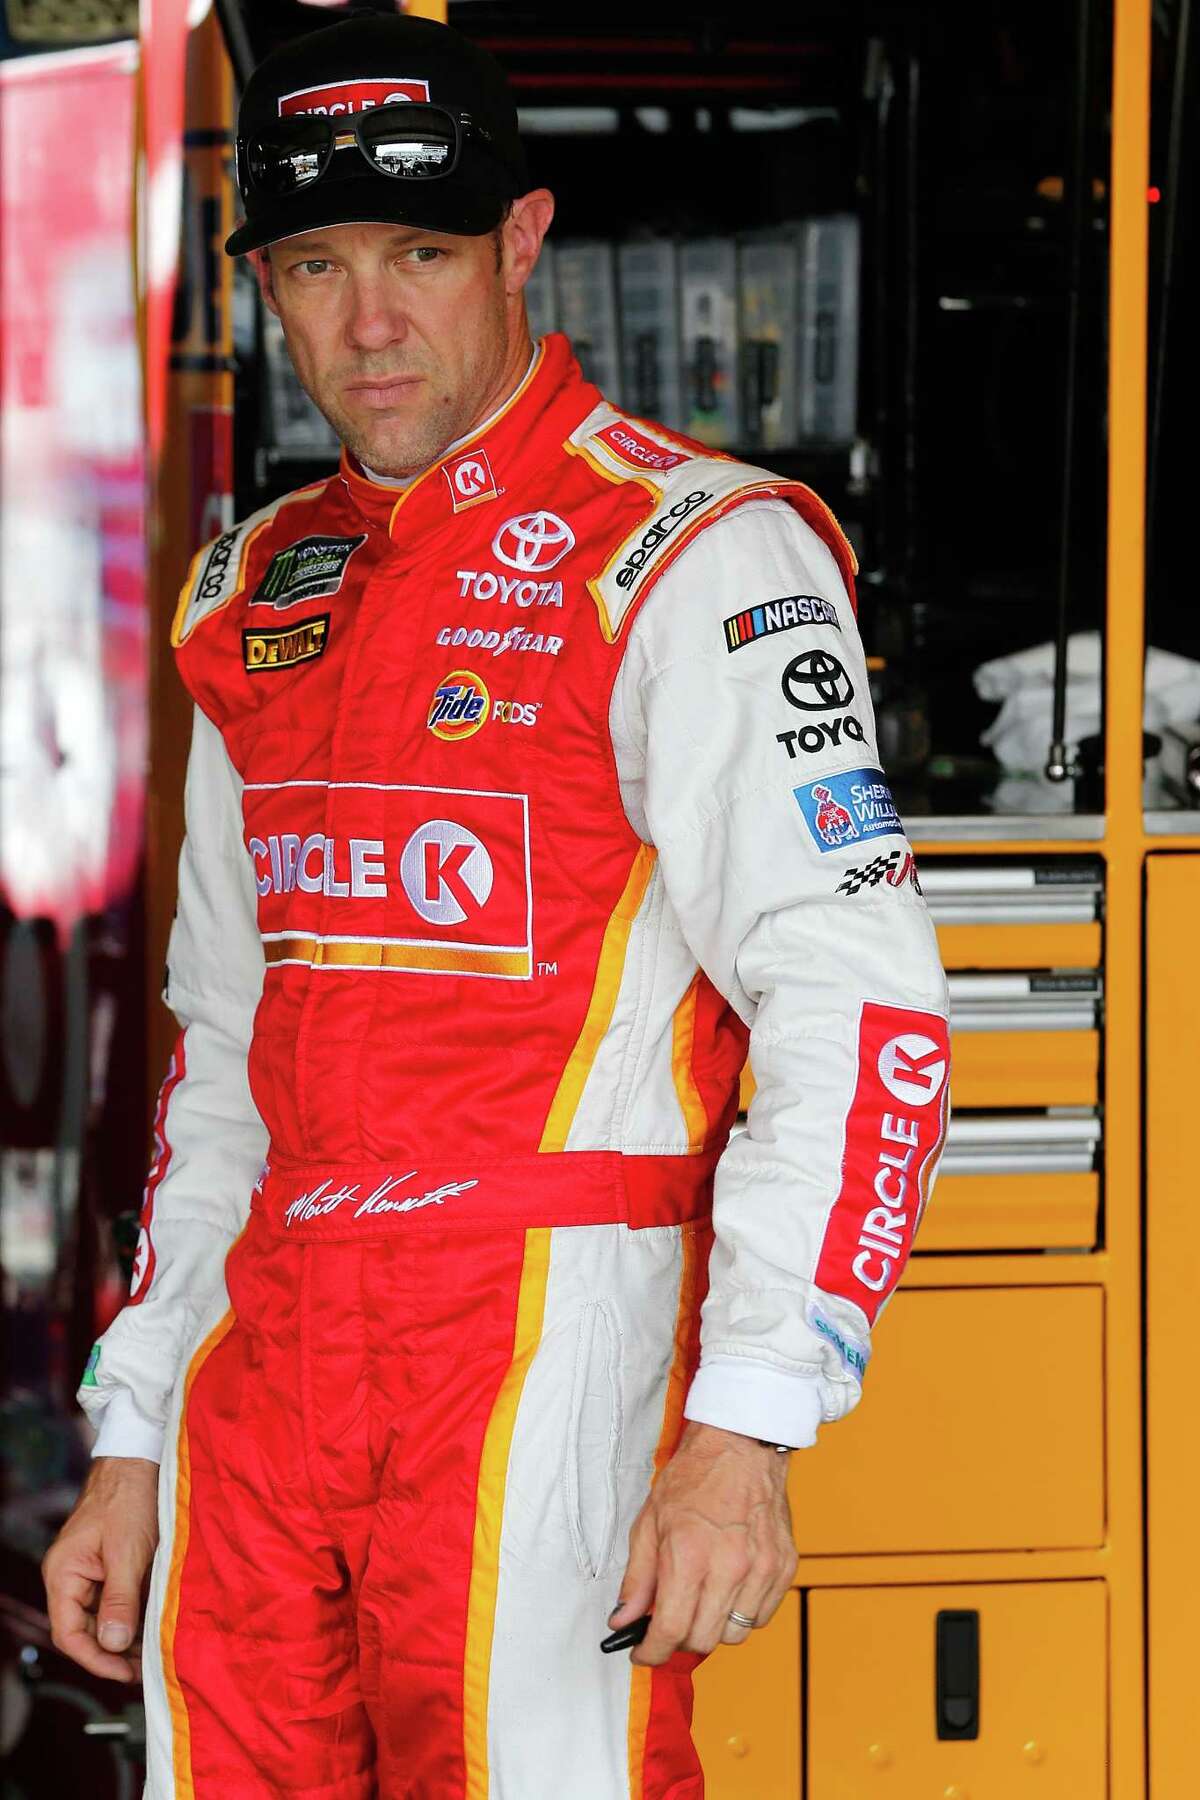 RICHMOND, VA - APRIL 28: Matt Kenseth, driver of the #20 Circle K Toyota, stands in the garage area during practice for the Monster Energy NASCAR Cup Series Toyota Owners 400 at Richmond International Raceway on April 28, 2017 in Richmond, Virginia. (Photo by Brian Lawdermilk/Getty Images)